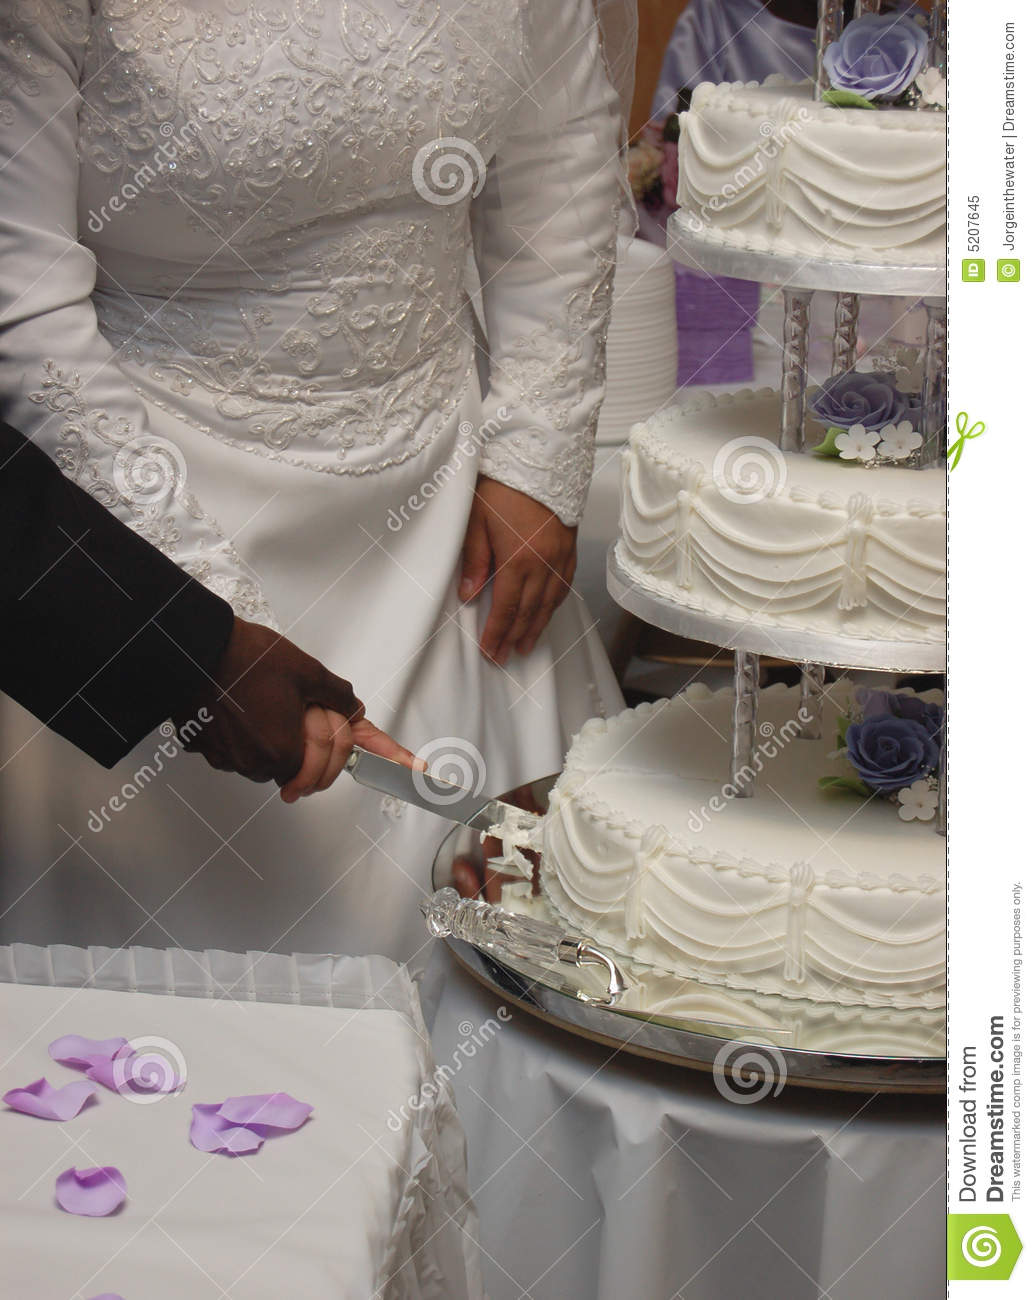 Free Pictures of a Wedding Cake Cutting